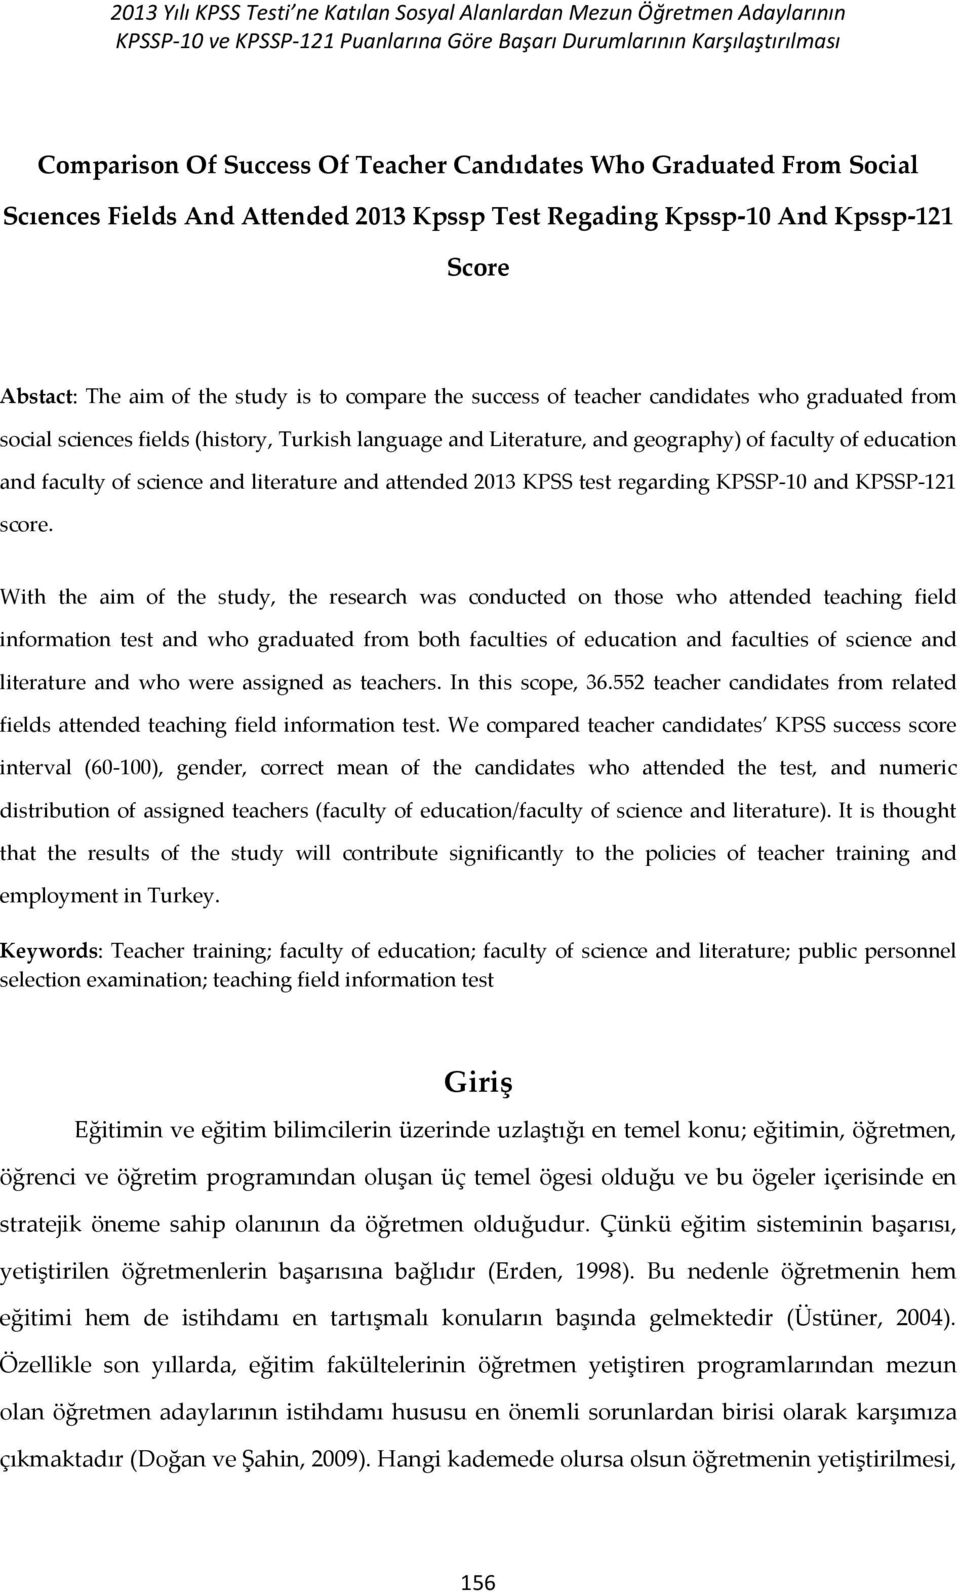 graduated from social sciences fields (history, Turkish language and Literature, and geography) of faculty of education and faculty of science and literature and attended 2013 KPSS test regarding